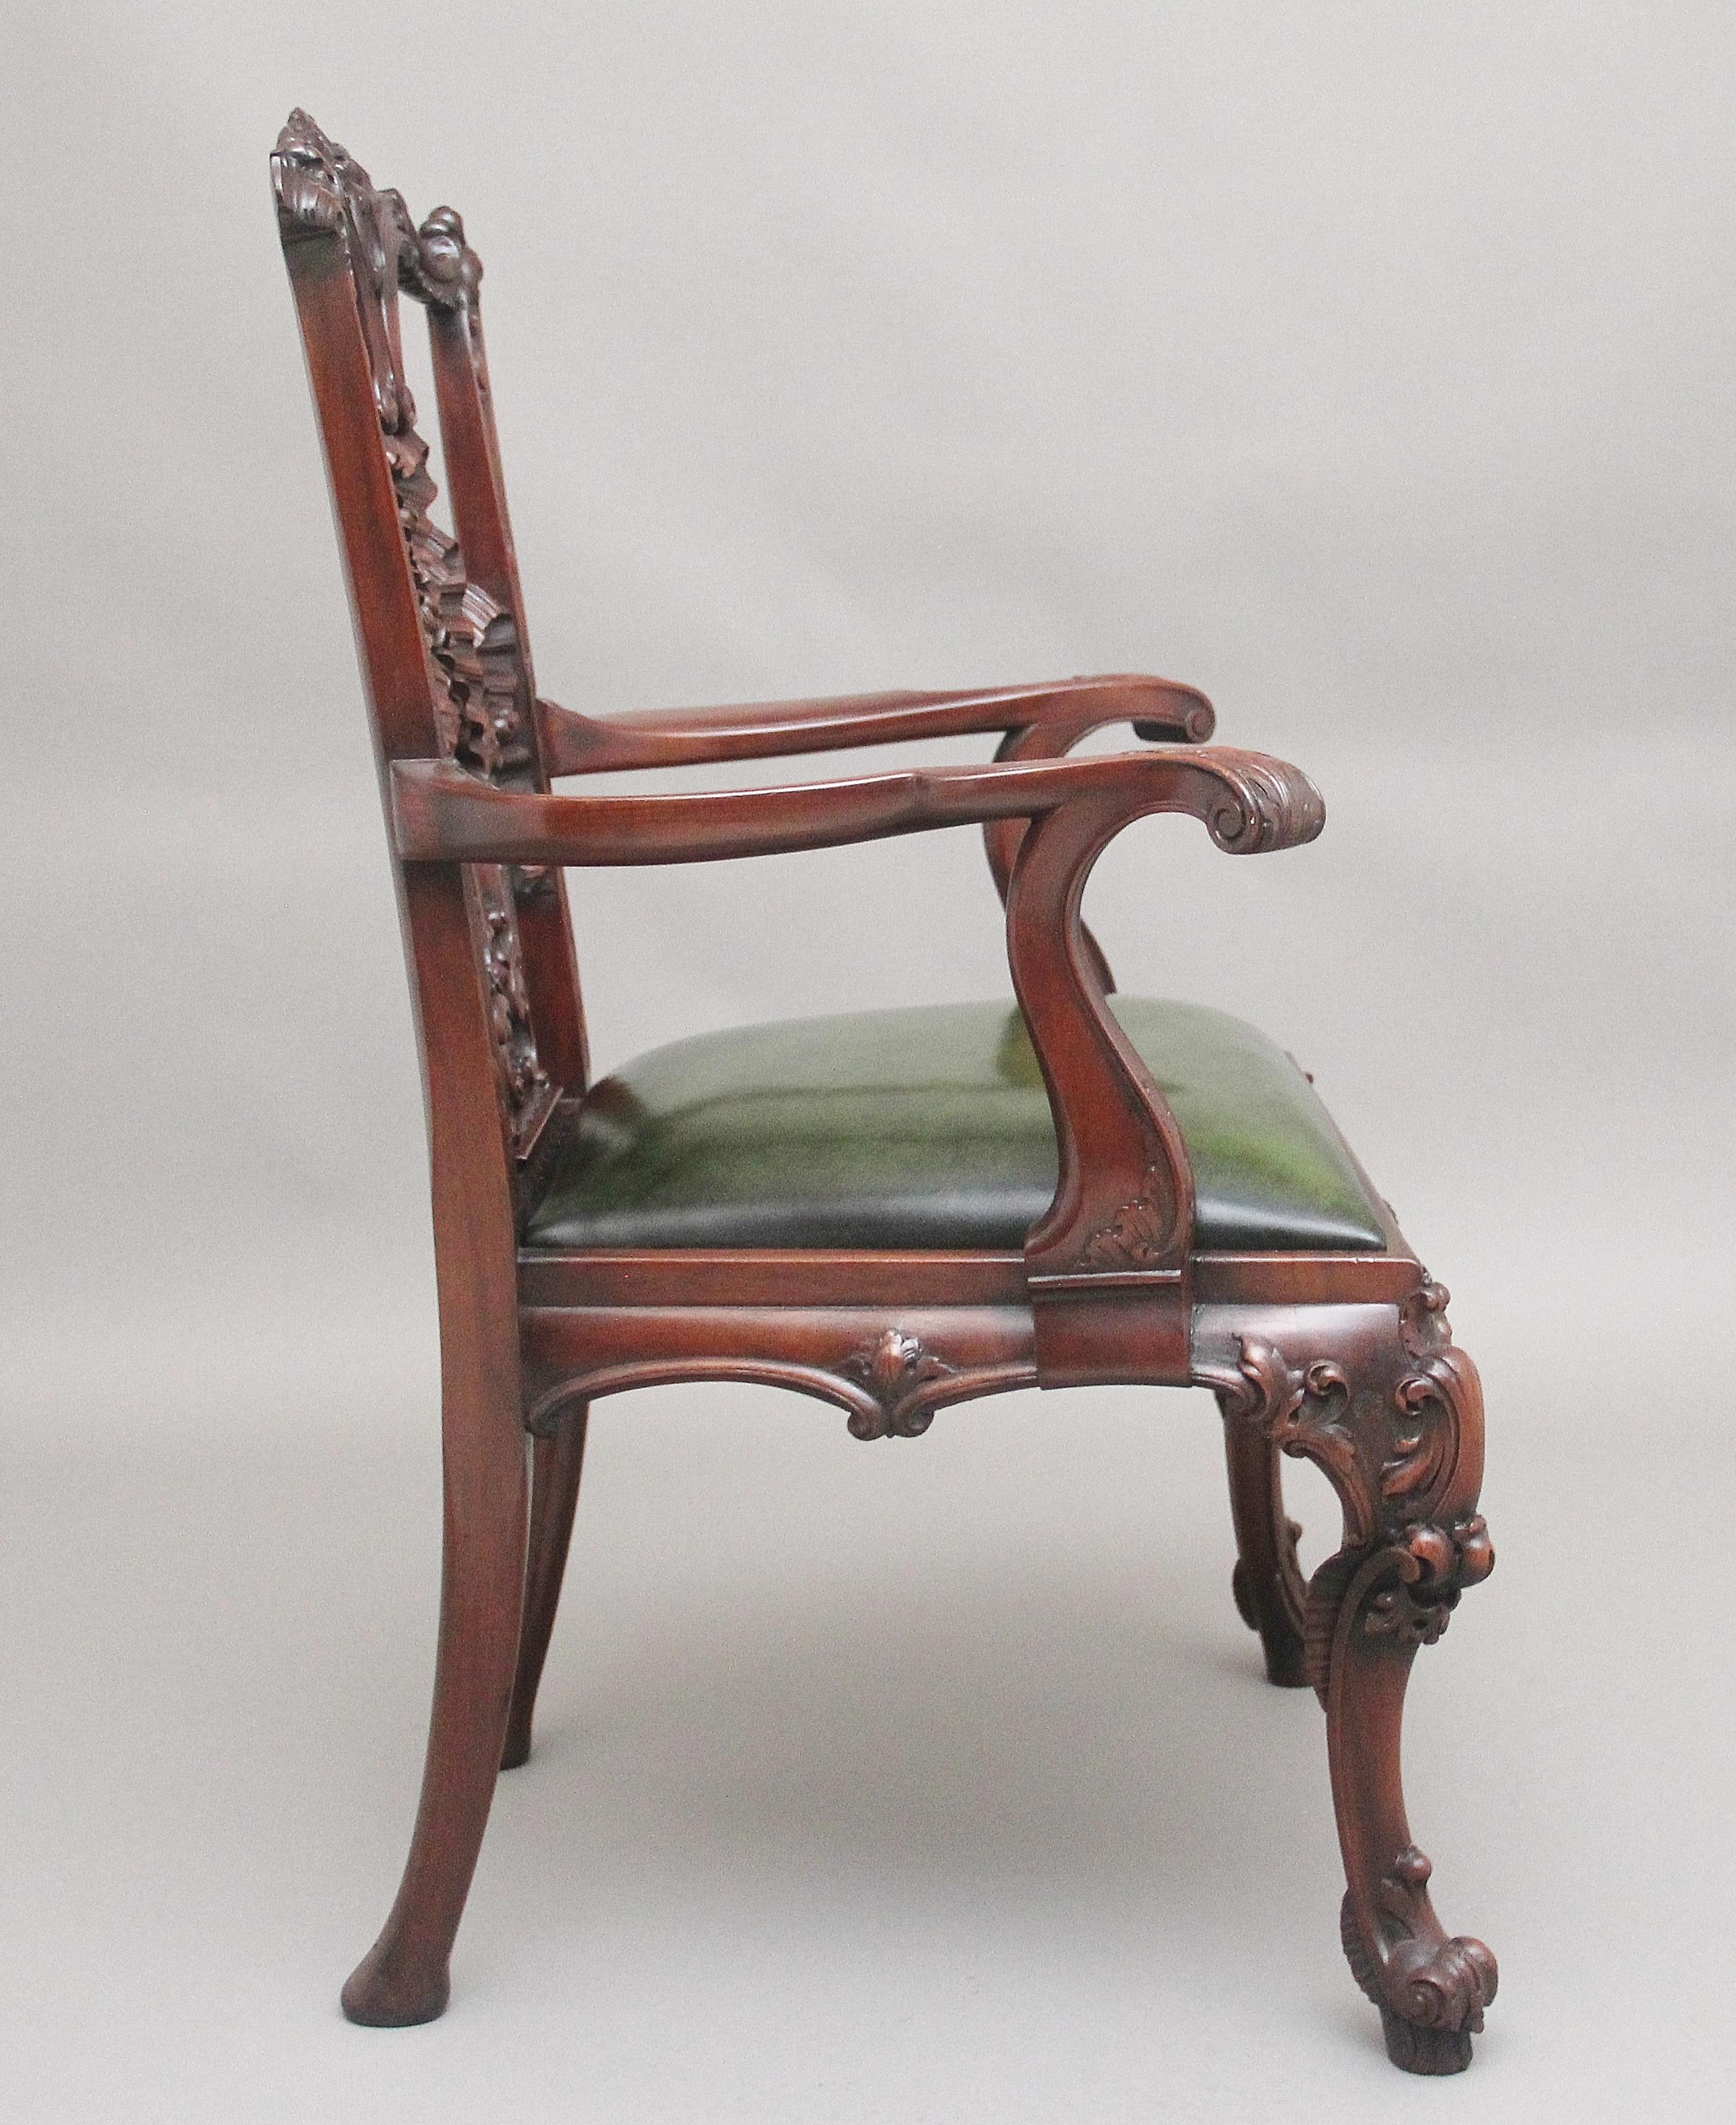 A highly decorative early 20th Century carved mahogany armchair in the Chippendale style, having a wonderfully carved and pierced back splat, the slender curved supports with scroll decoration on the front of the arms, having a re-upholstered